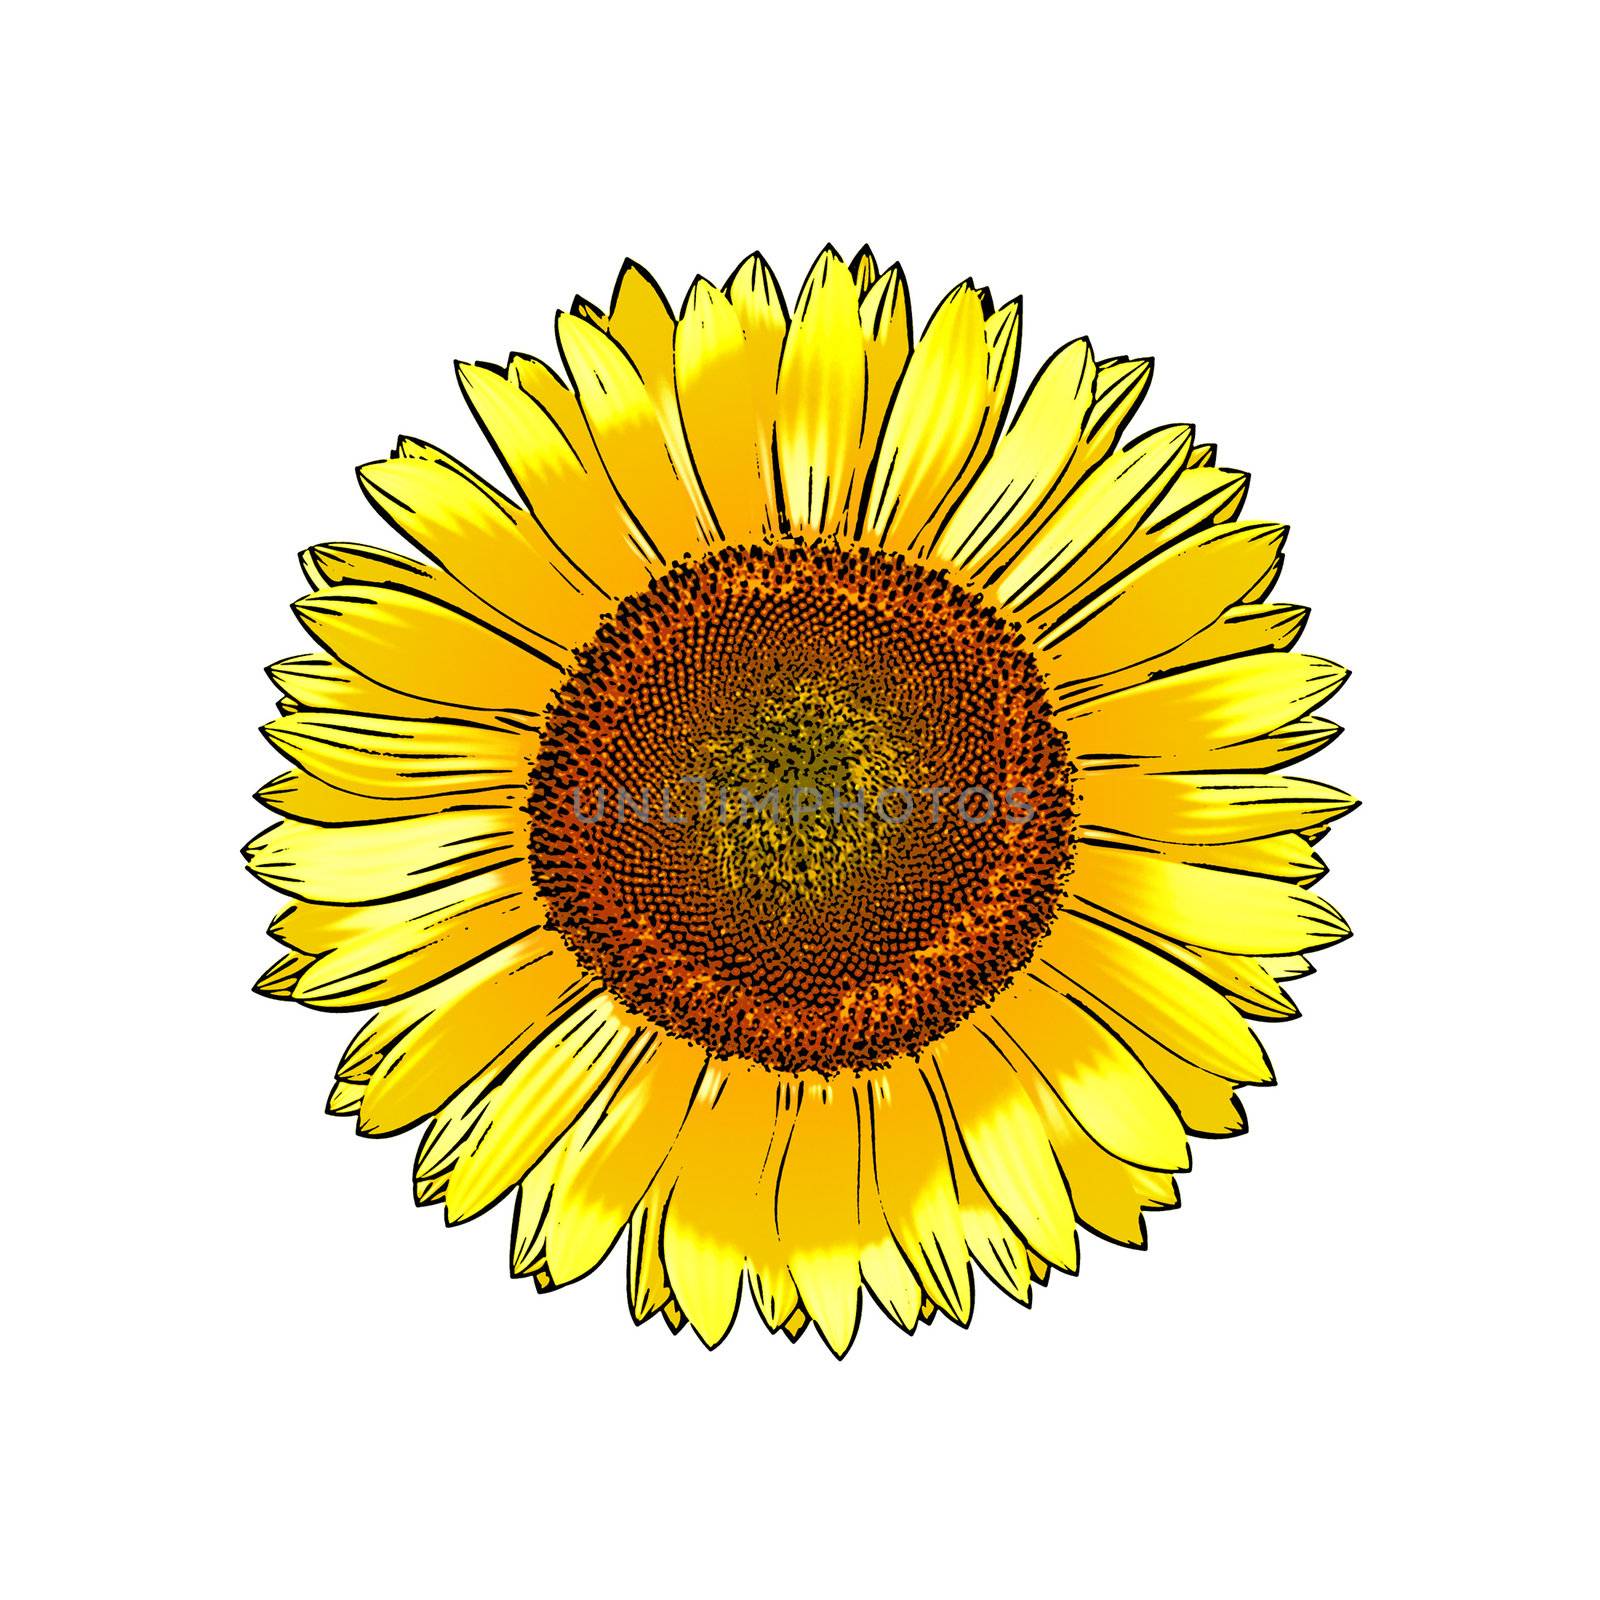 An image of a beautiful painted comic sunflower